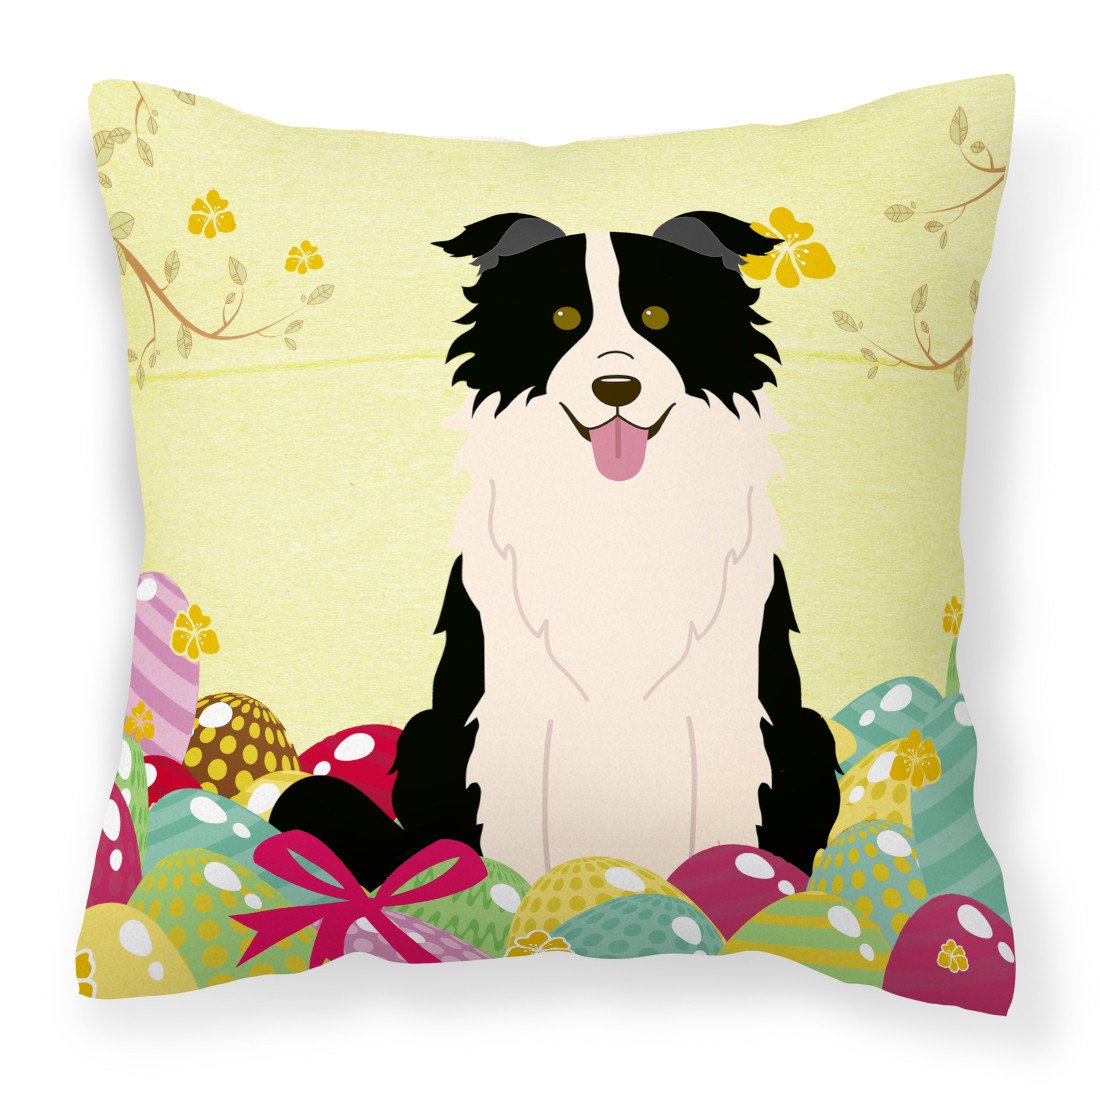 Easter Eggs Border Collie Black White Fabric Decorative Pillow BB6118PW1818 by Caroline's Treasures